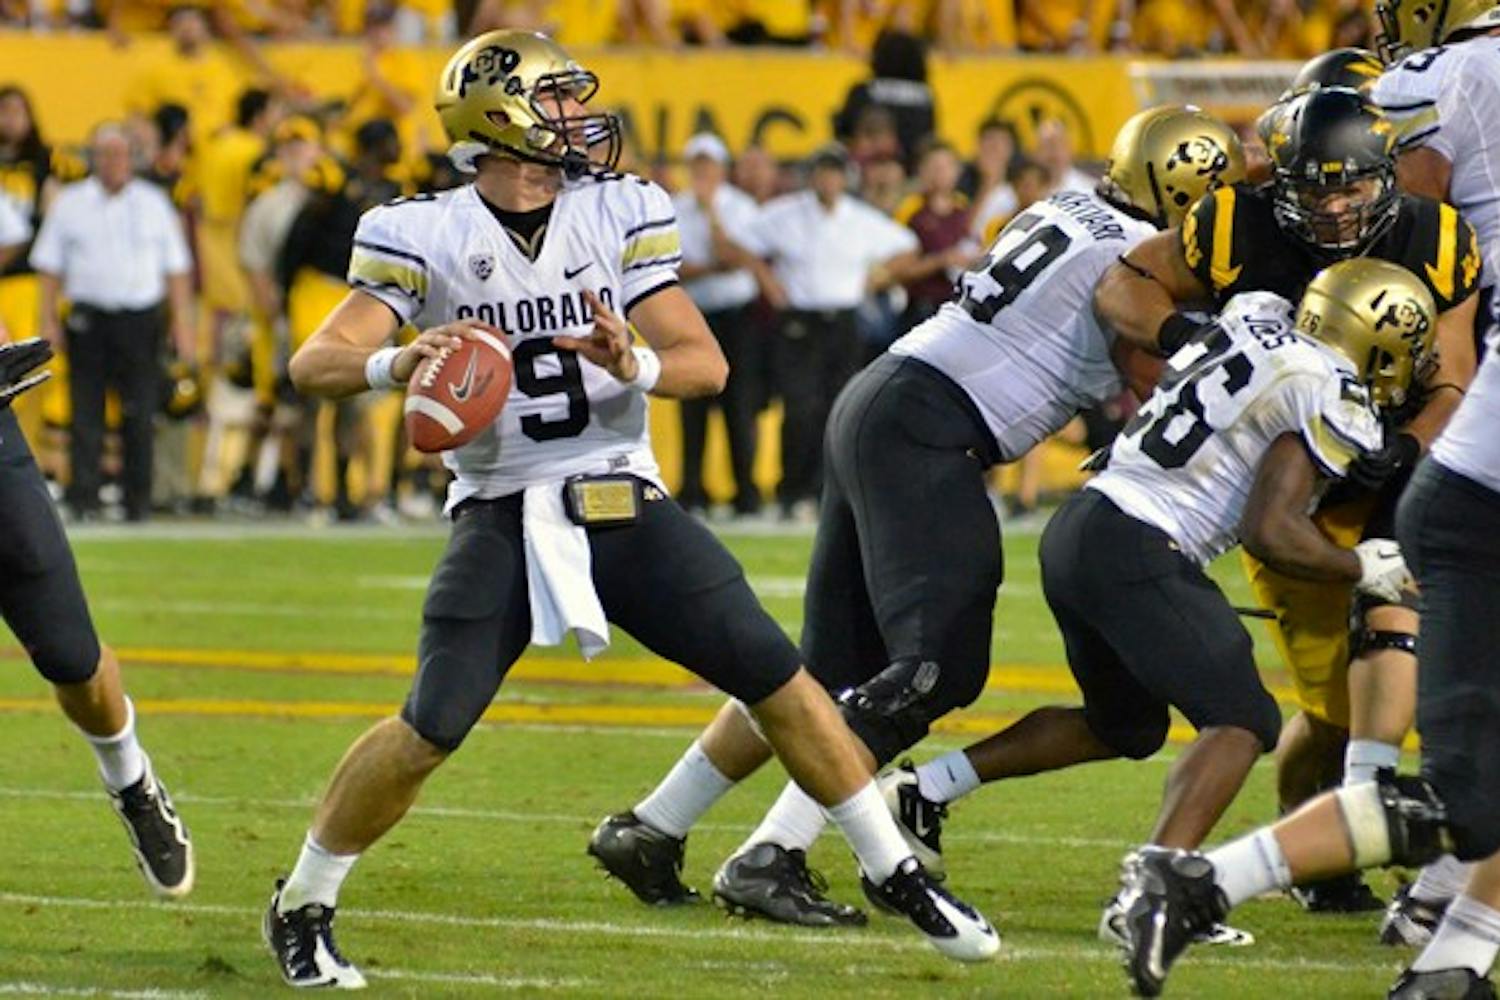 STILL THE WRONG FOOT: Colorado senior quarterback Tyler Hansen begins his throwing motion during the Buffaloes’ 48-14 loss to the Sun Devils on Saturday. CU coach Jon Embree expressed dissatisfaction at some of his players’ complacency despite being 0-5 in their first season in the Pac-12. (Photo by Aaron Lavinsky)